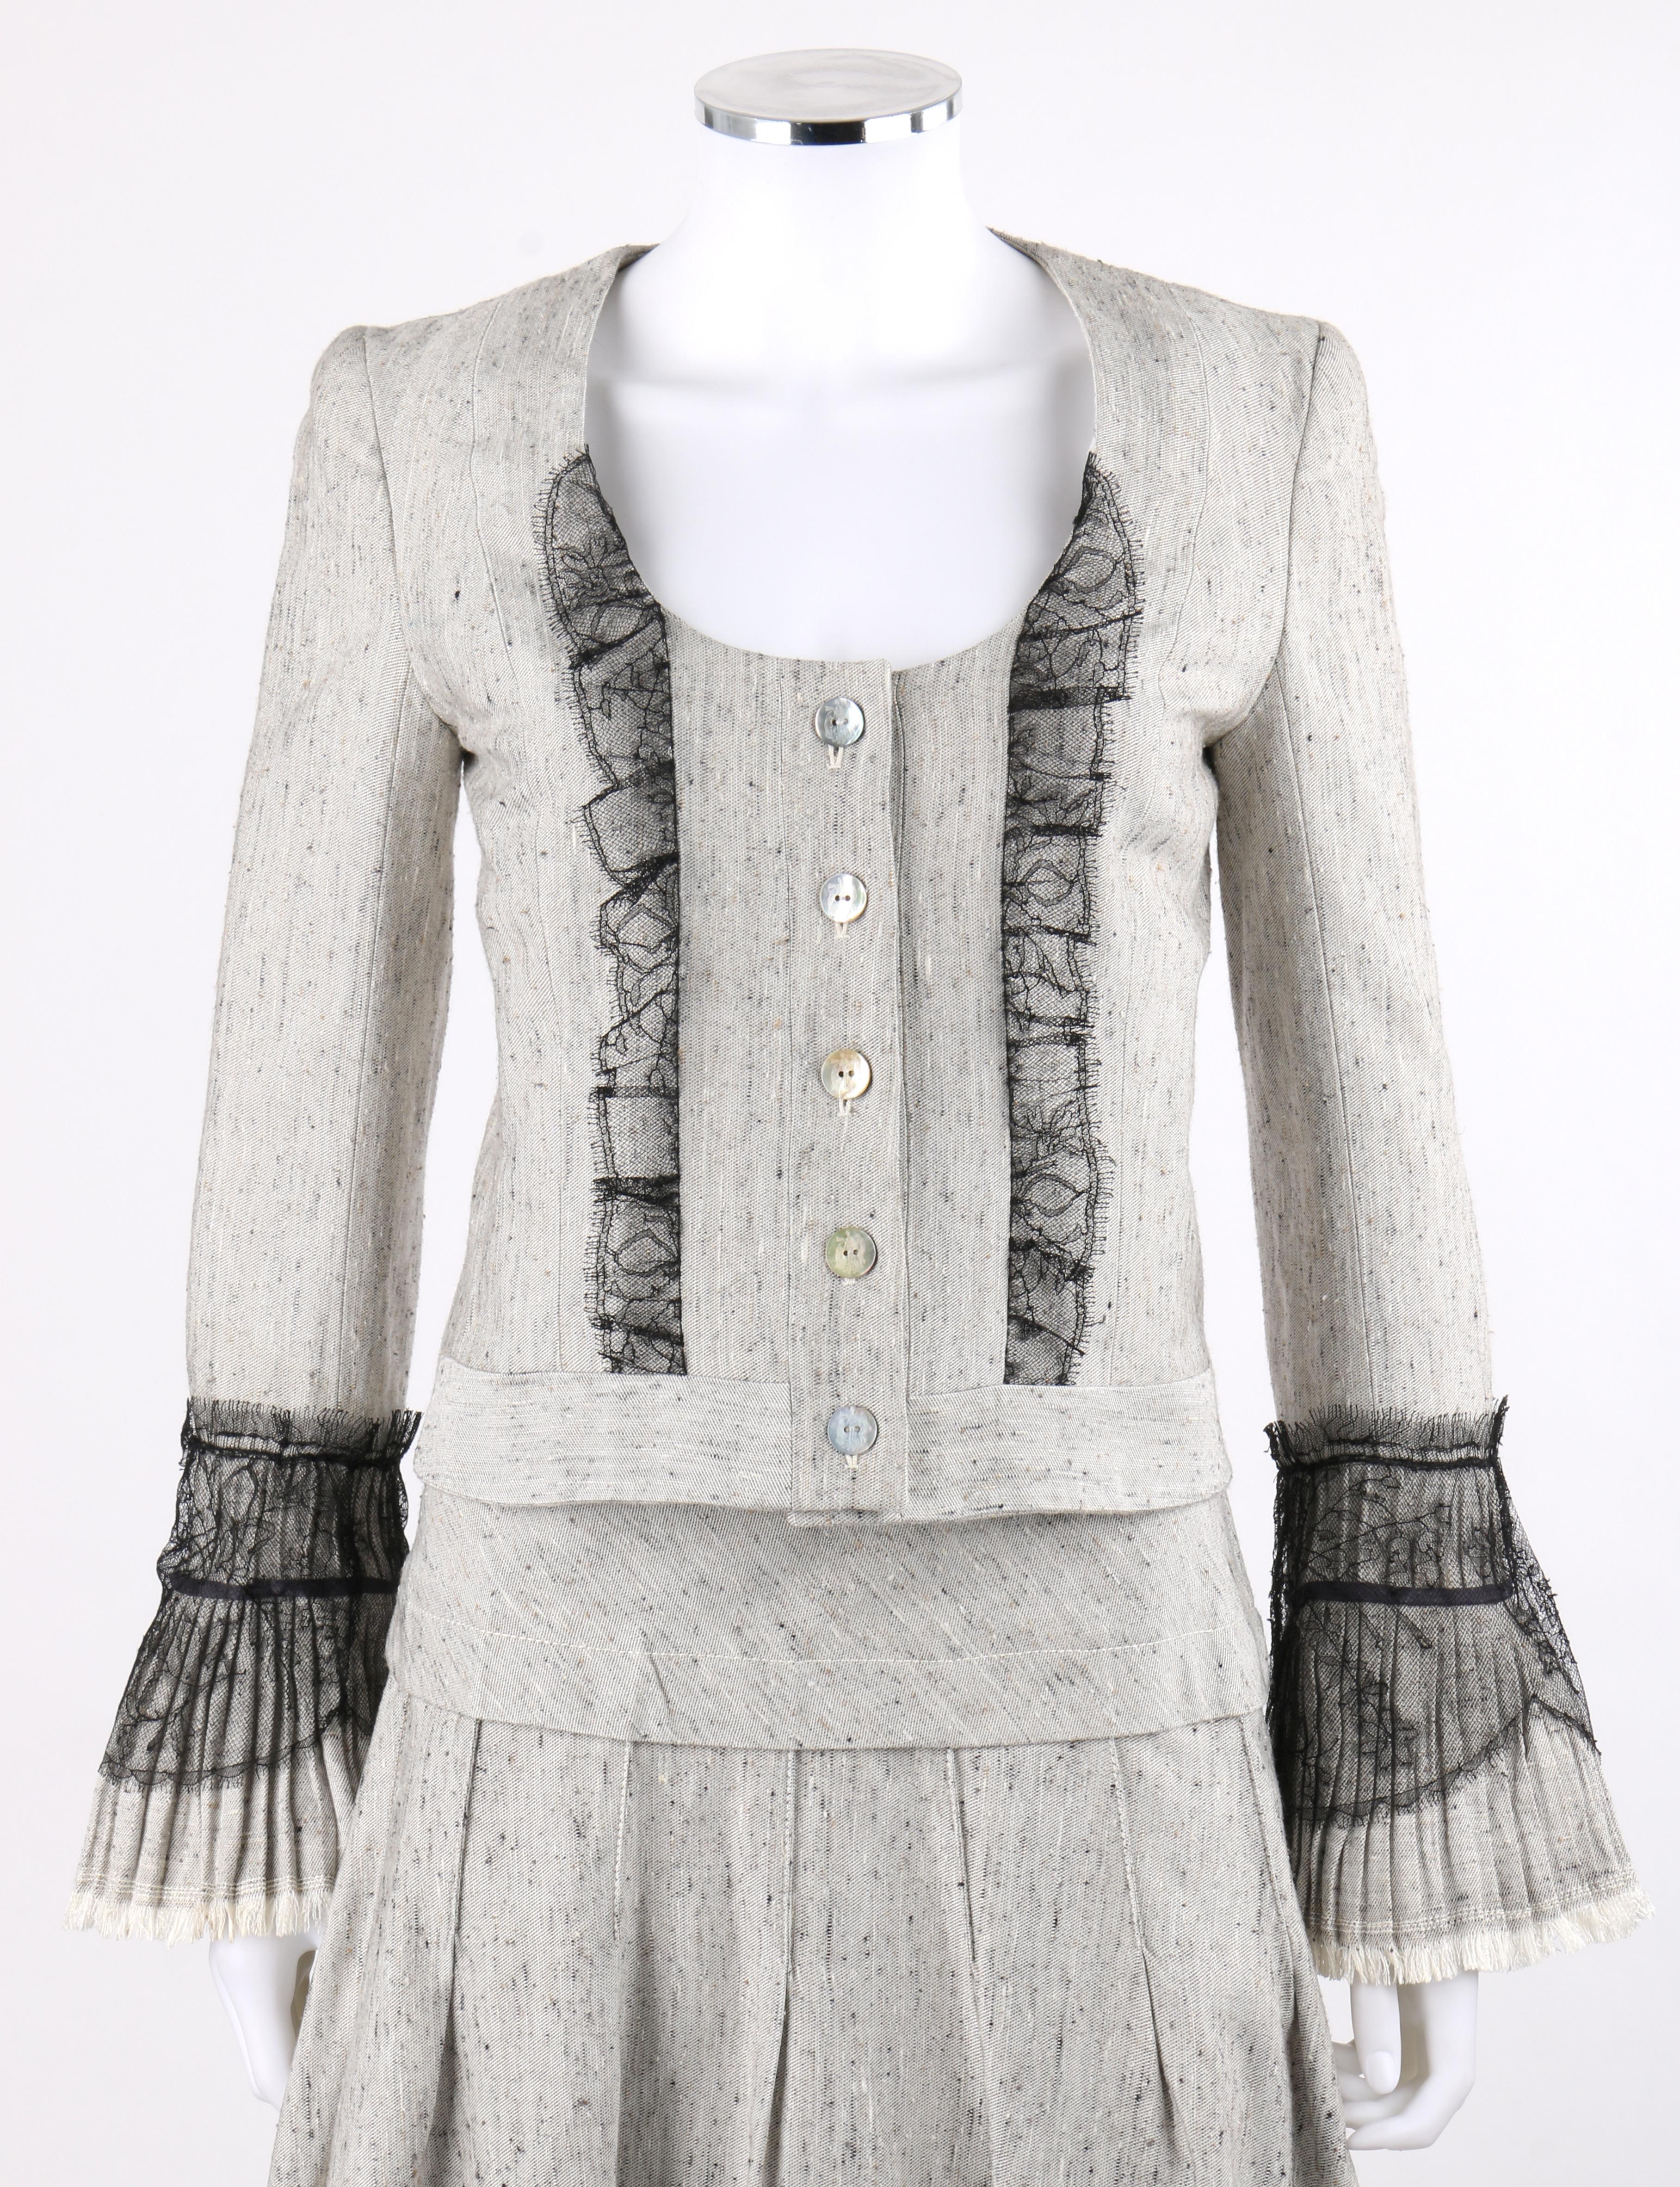 NINA RICCI 2 Pc Gray Black Lace Silk Tweed Dress Jacket Pleated Skirt Suit Set
 
Brand / Manufacturer: Nina Ricci
Style: Jacket; pleated skirt
Color(s): Shades of gray, black, tan, and white
Lined: Yes- jacket
Marked Fabric Content: “100% Silk”